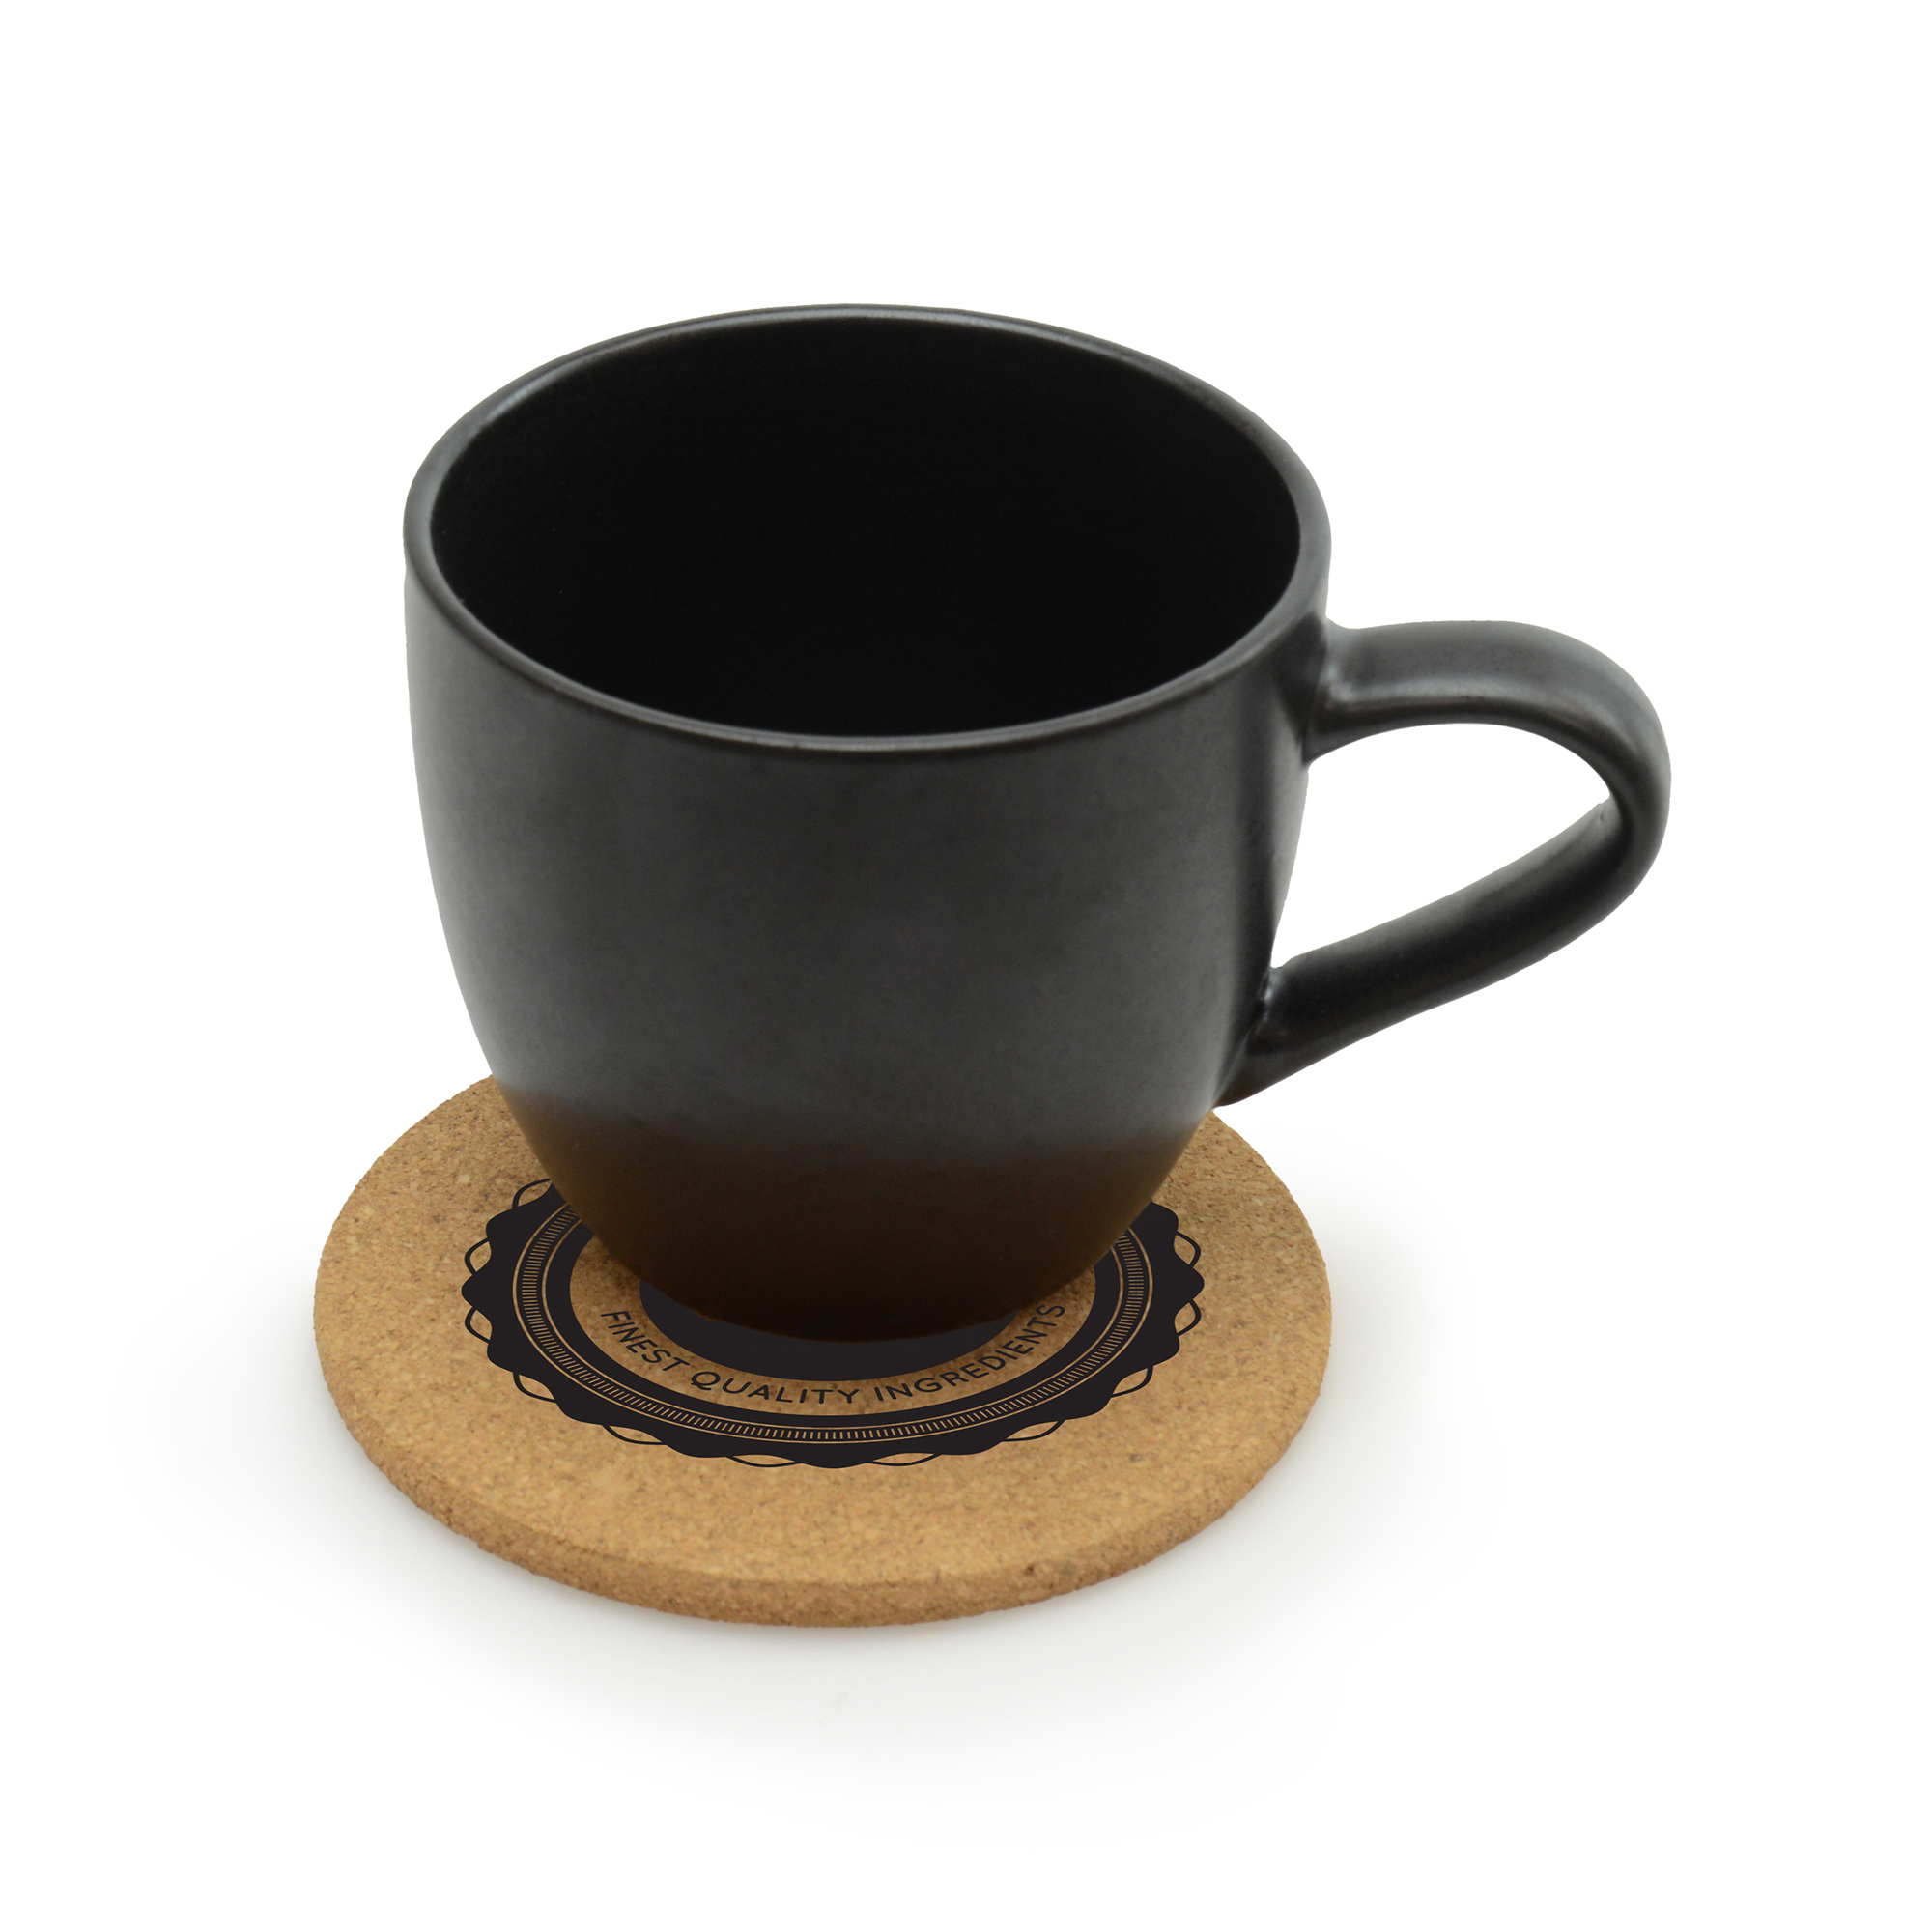 10cm diameter, 5mm thick, circular cork coaster. Colour can vary due to it being a natural product.